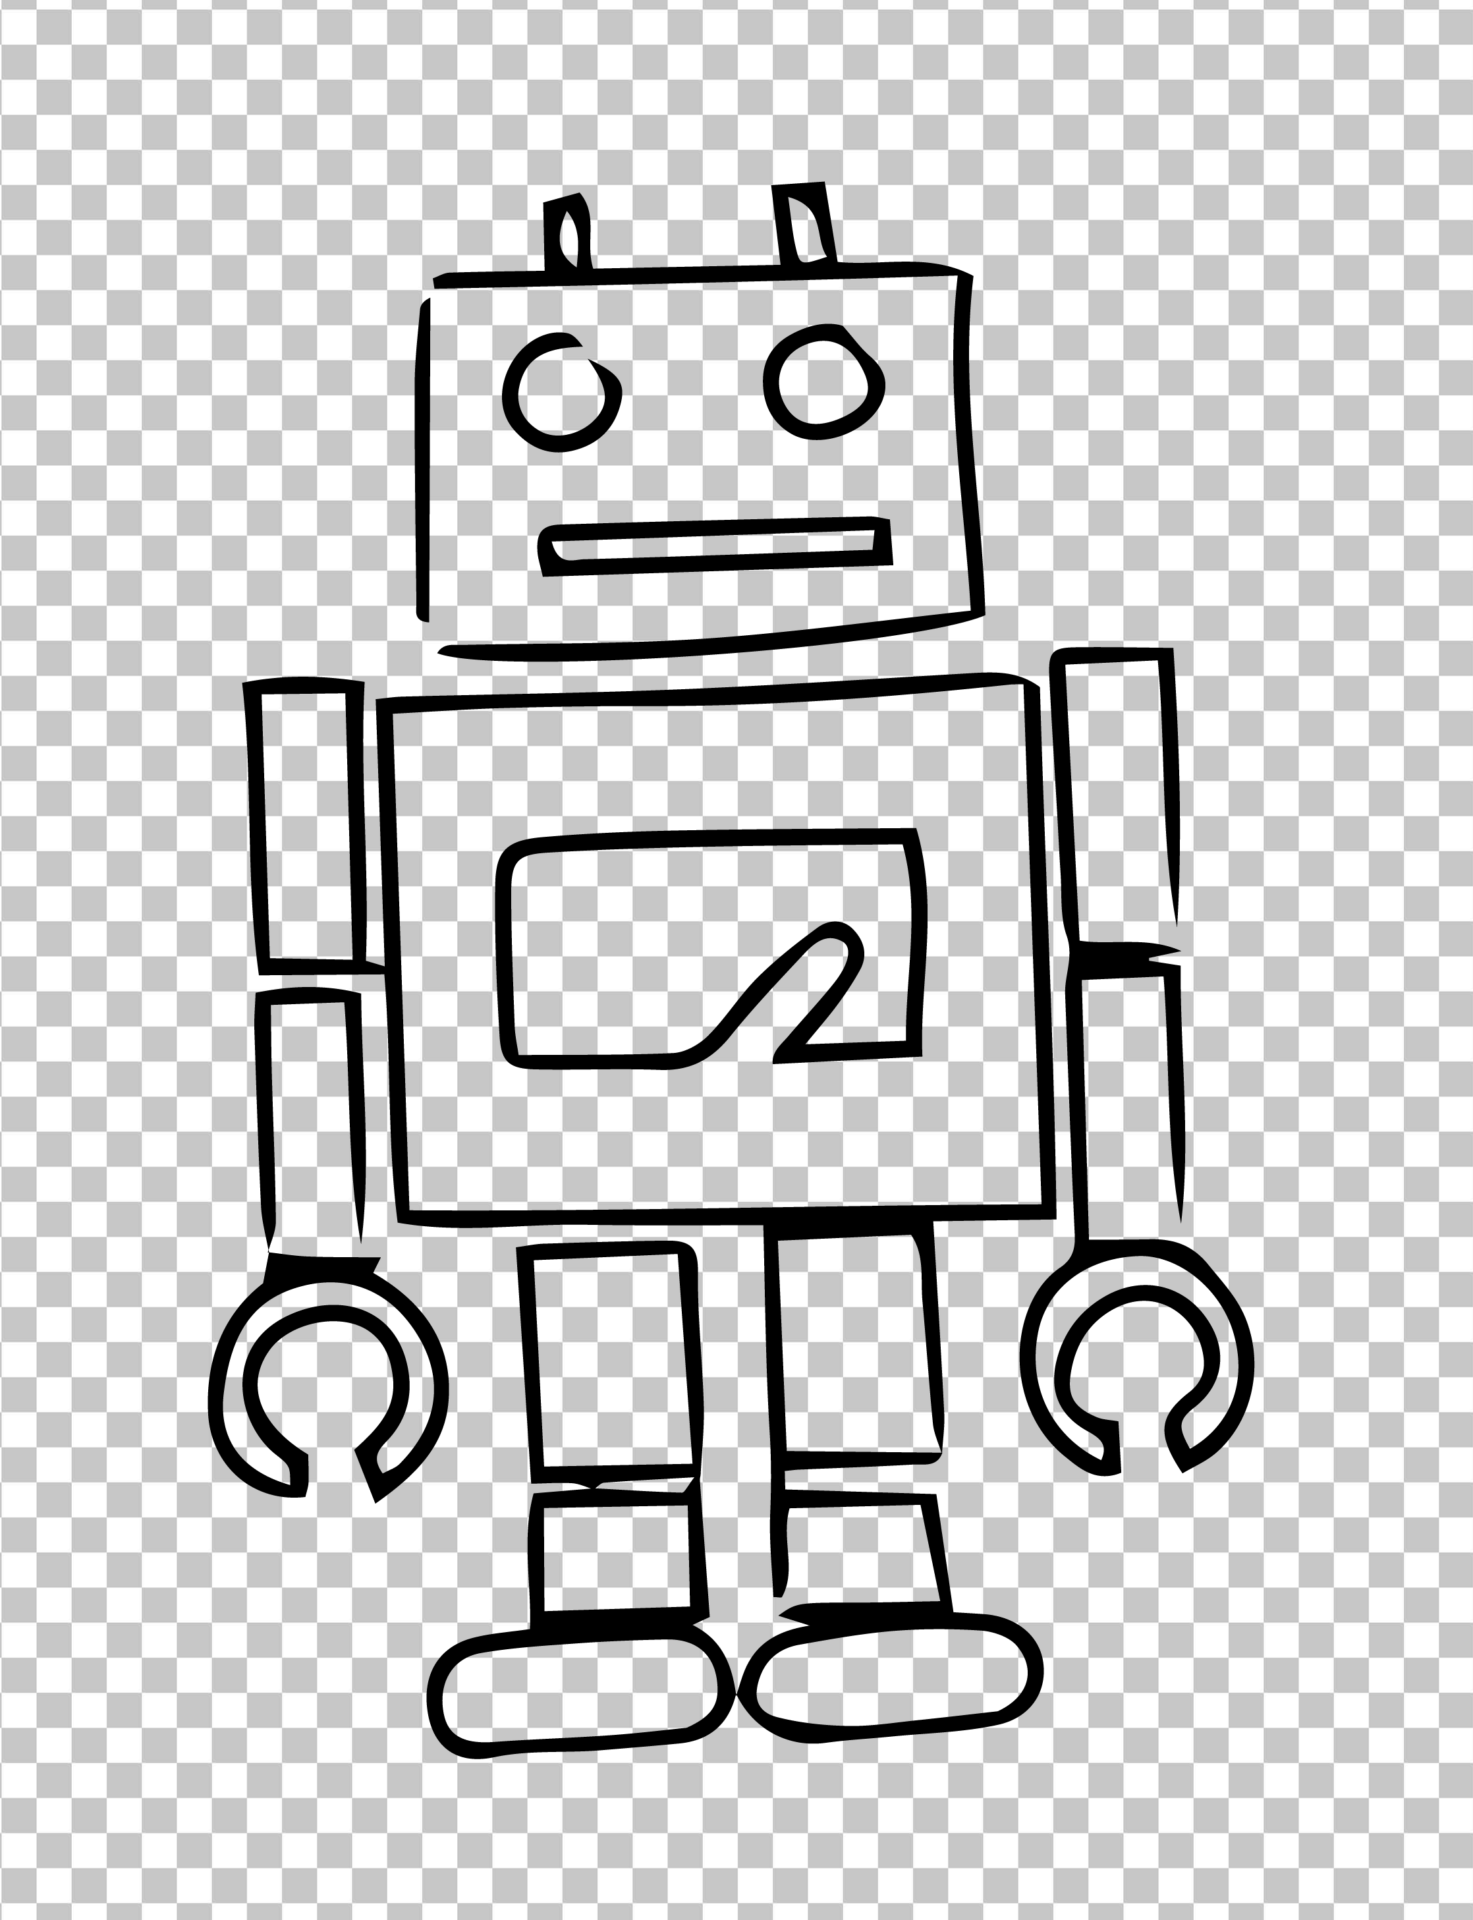 Realistic Robot Drawing PNG Transparent Images Free Download